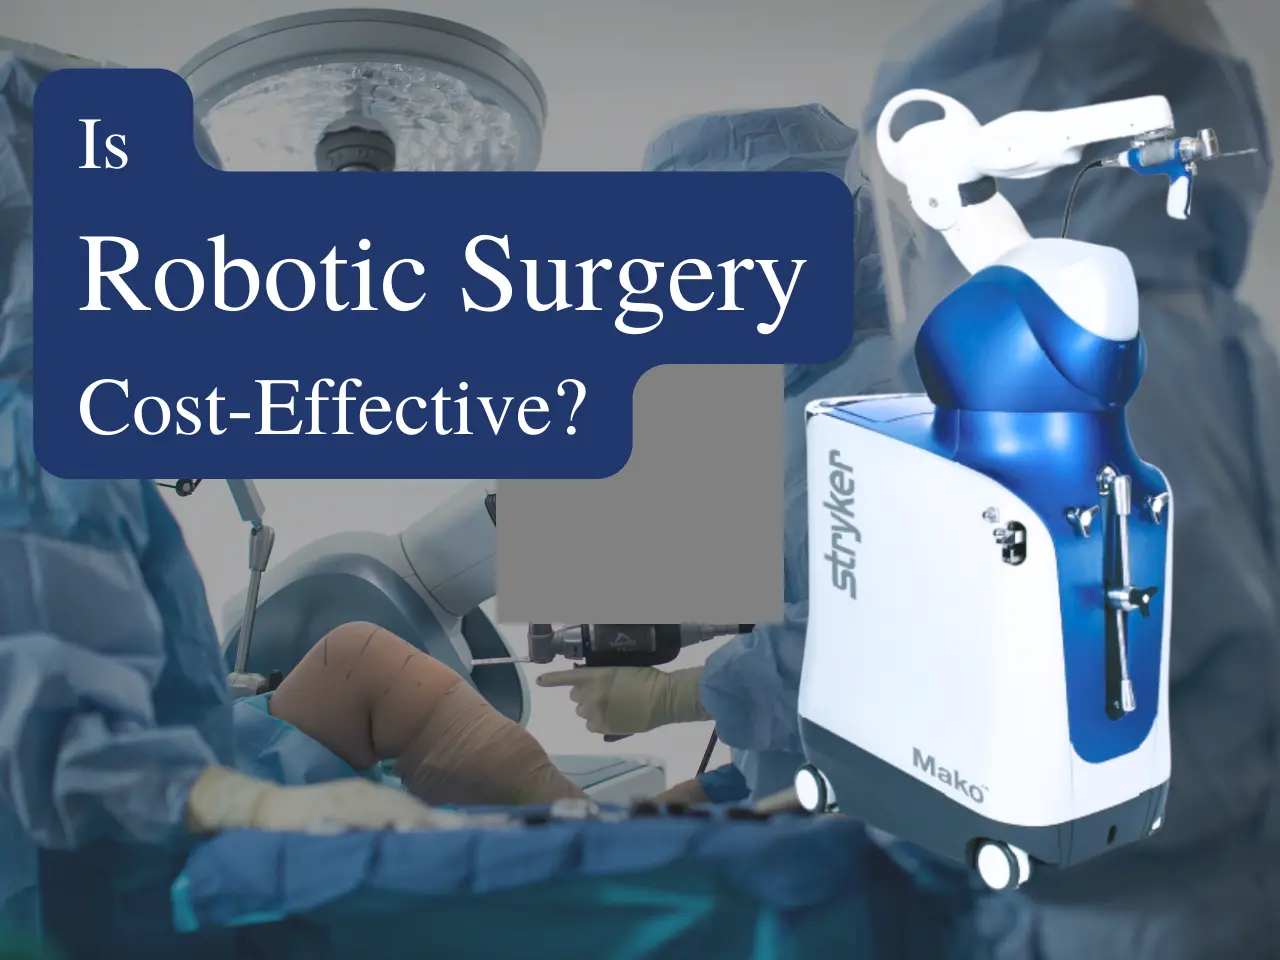 Is Robotic Surgery Cost-Effective